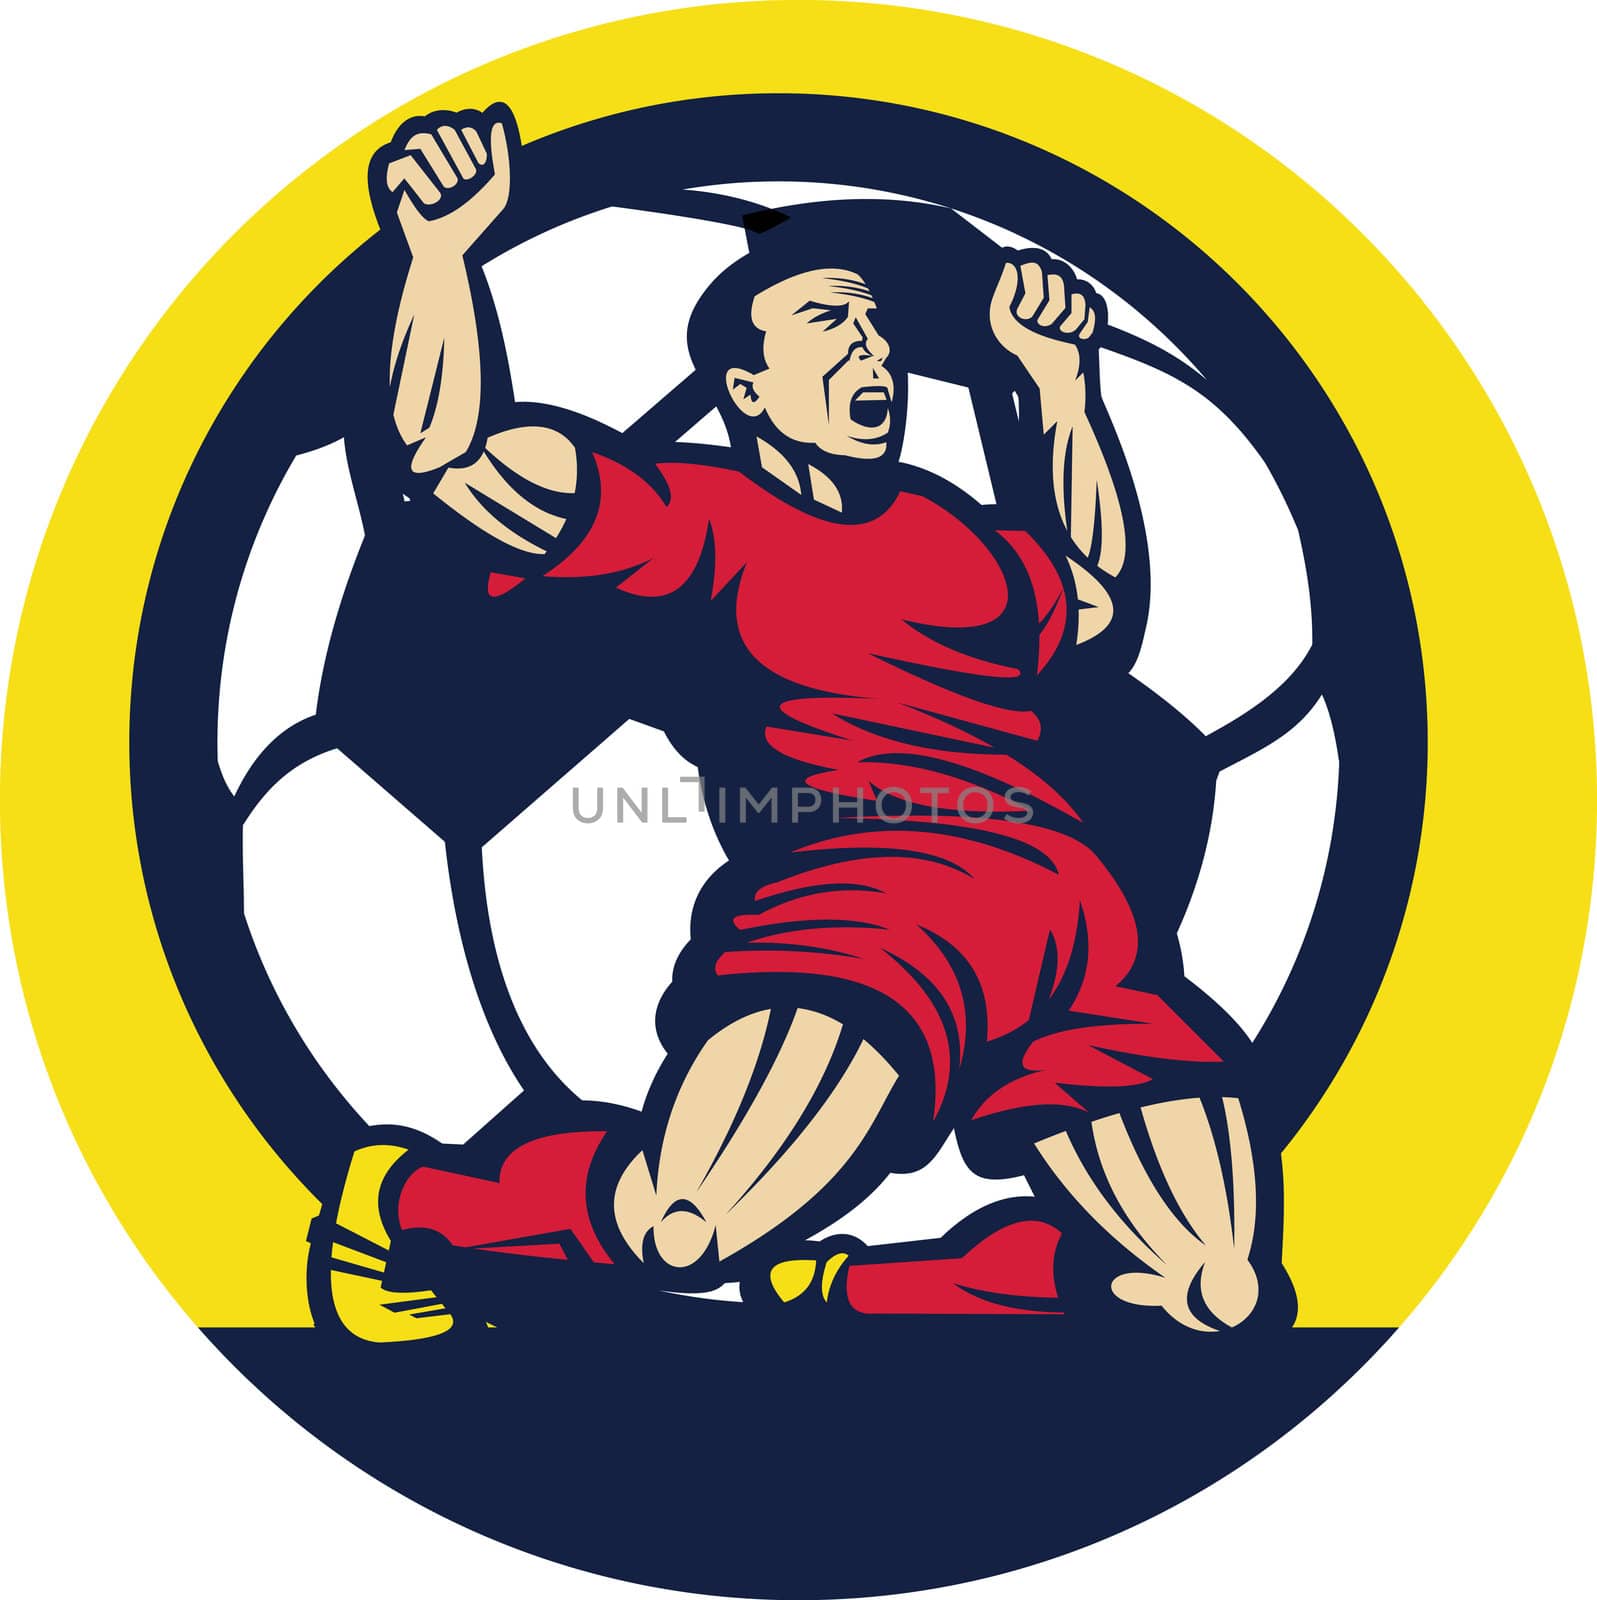 illustration of a Soccer player celebrating a goal with ball in background